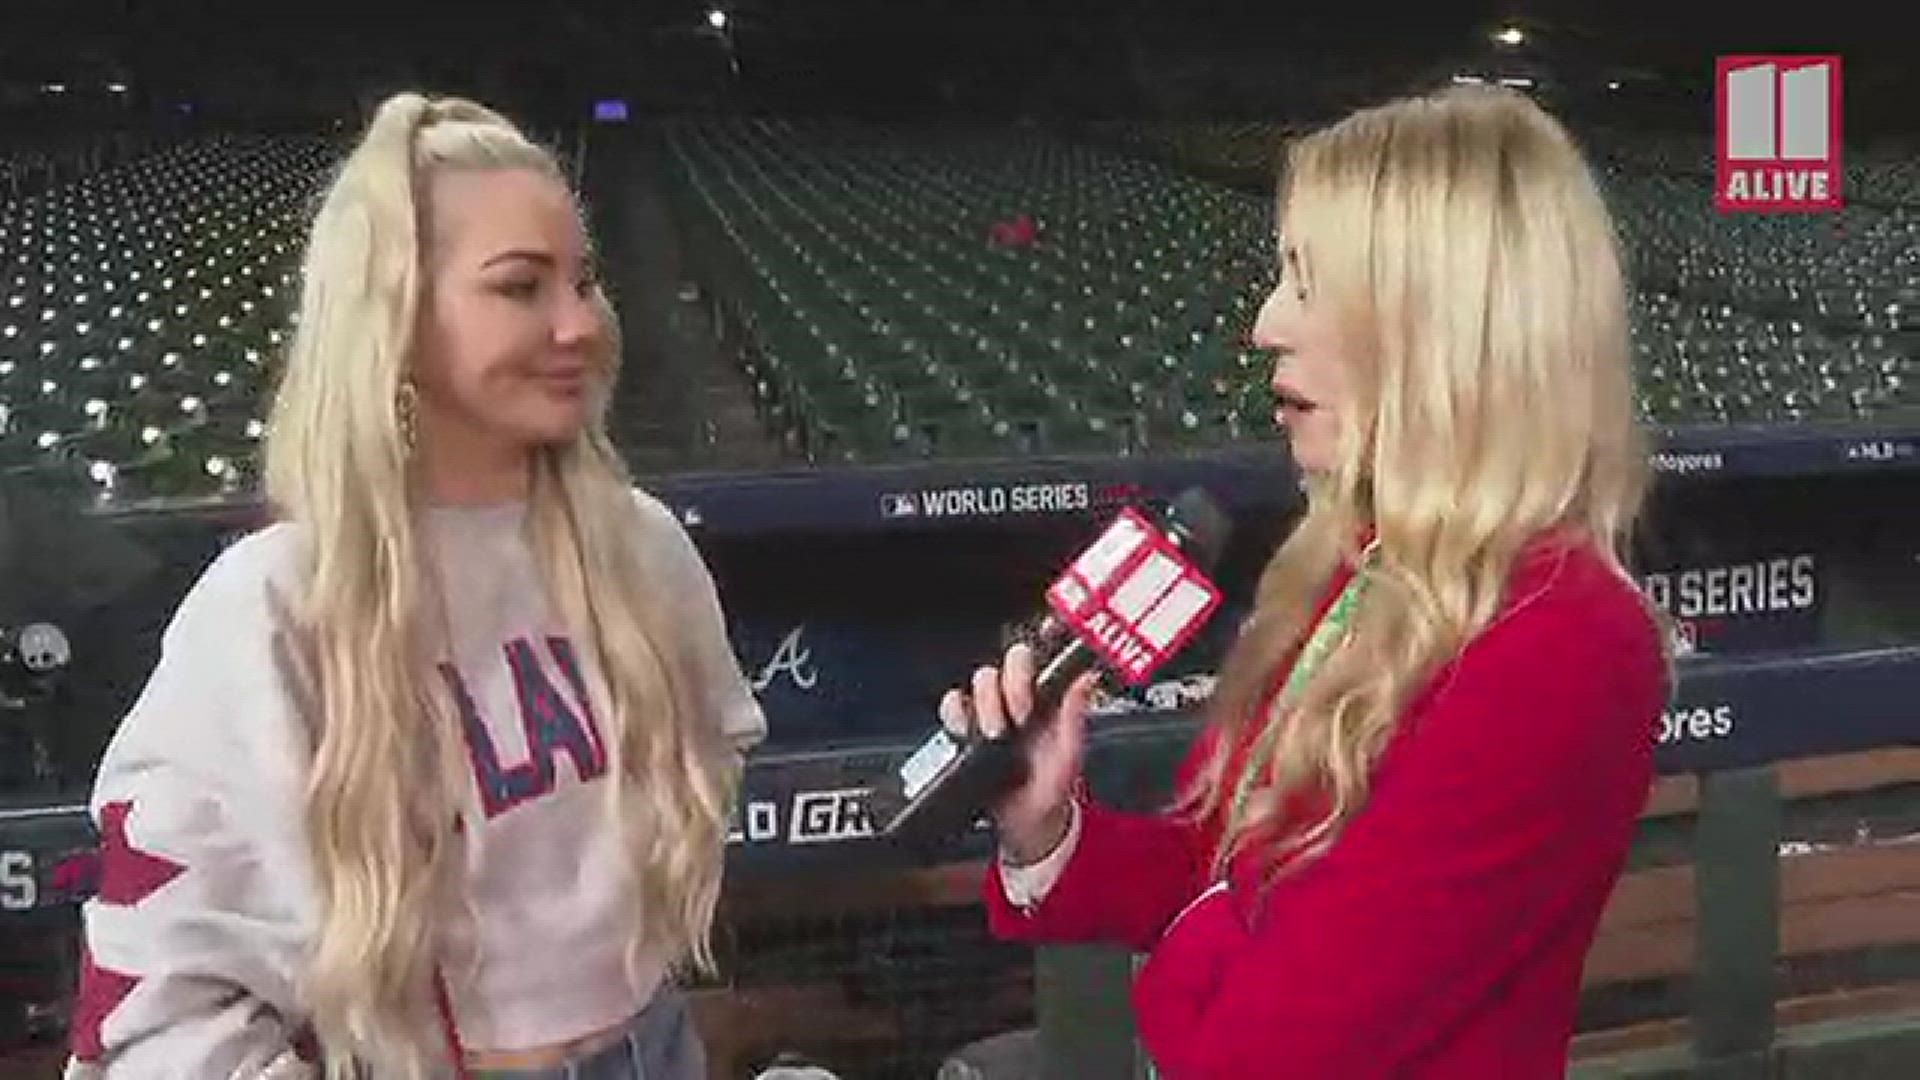 Chelsea Freeman said she text the other wives and told them "let's go!" The Atlanta Braves won the World Series in Game 6 against the Houston Astros.